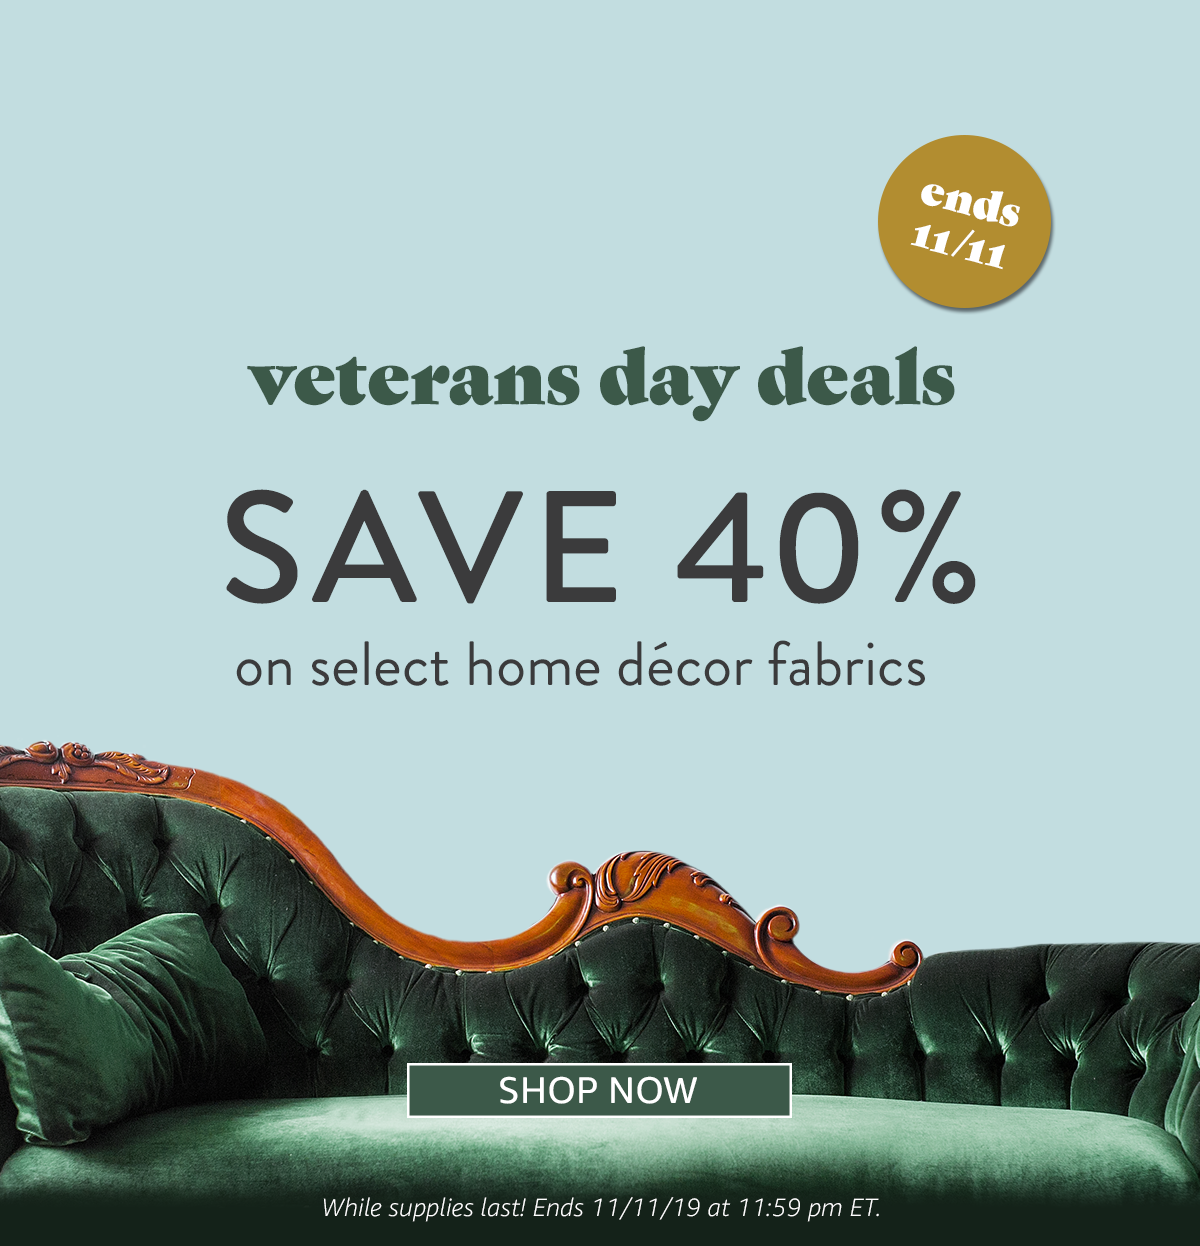 Veterans Day Deals | Save 40% on select home decor fabrics | SHOP NOW